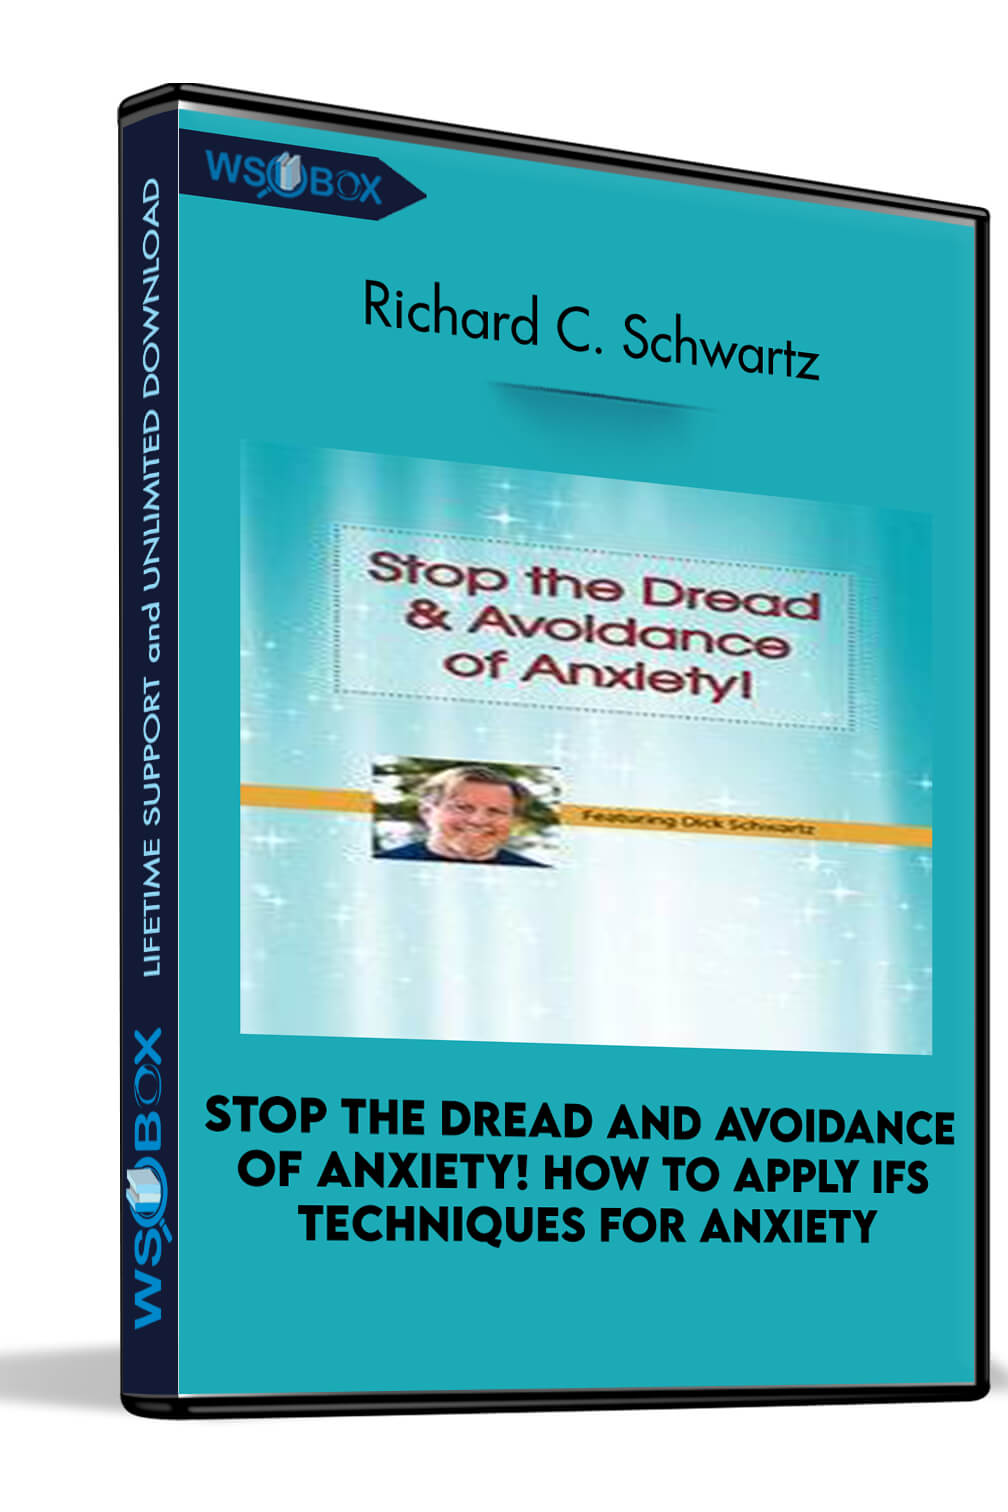 Stop the Dread and Avoidance of Anxiety! How to Apply IFS Techniques for Anxiety – Richard C. Schwartz